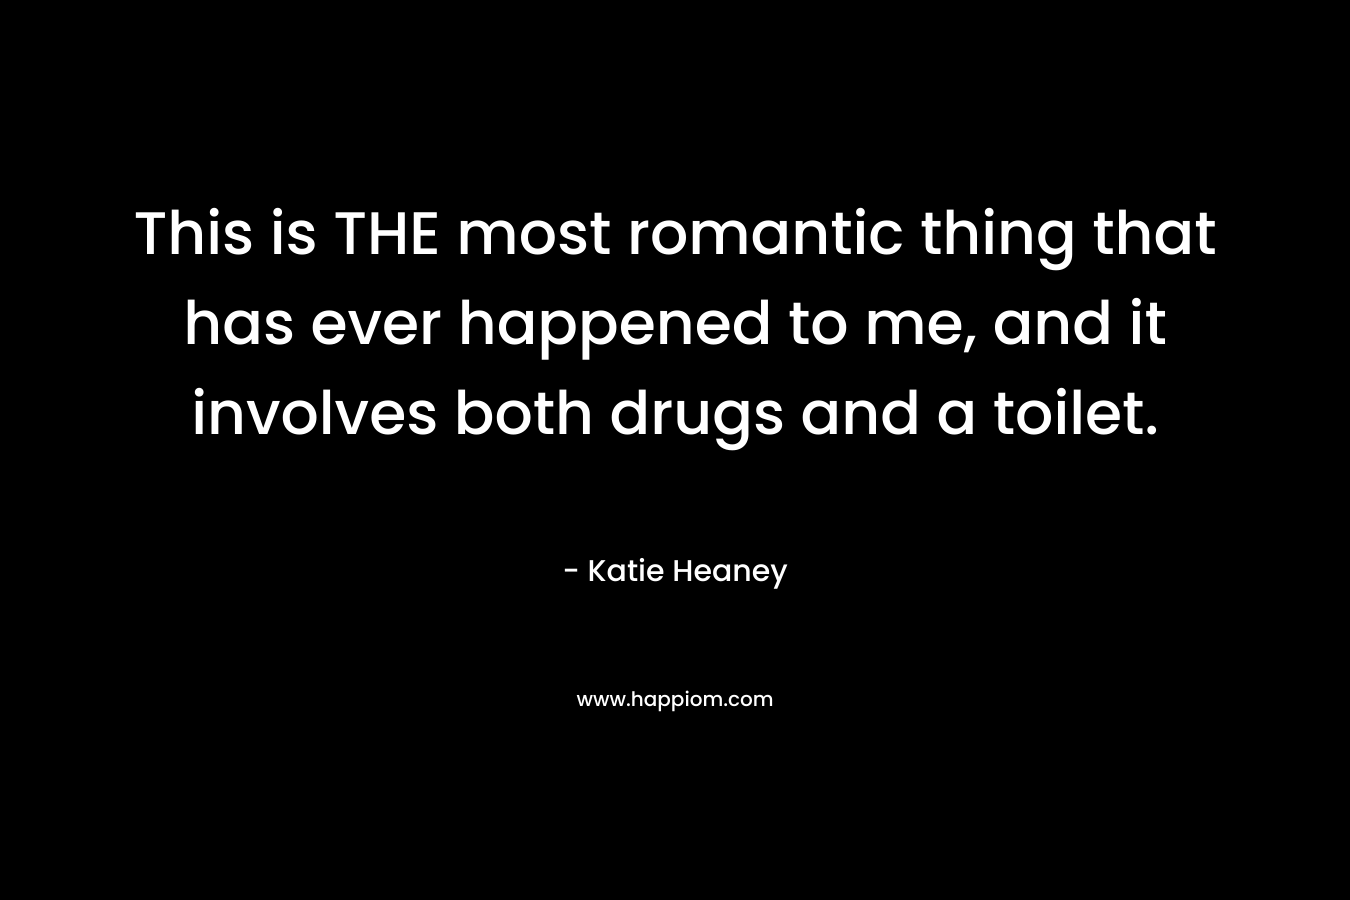 This is THE most romantic thing that has ever happened to me, and it involves both drugs and a toilet. – Katie Heaney